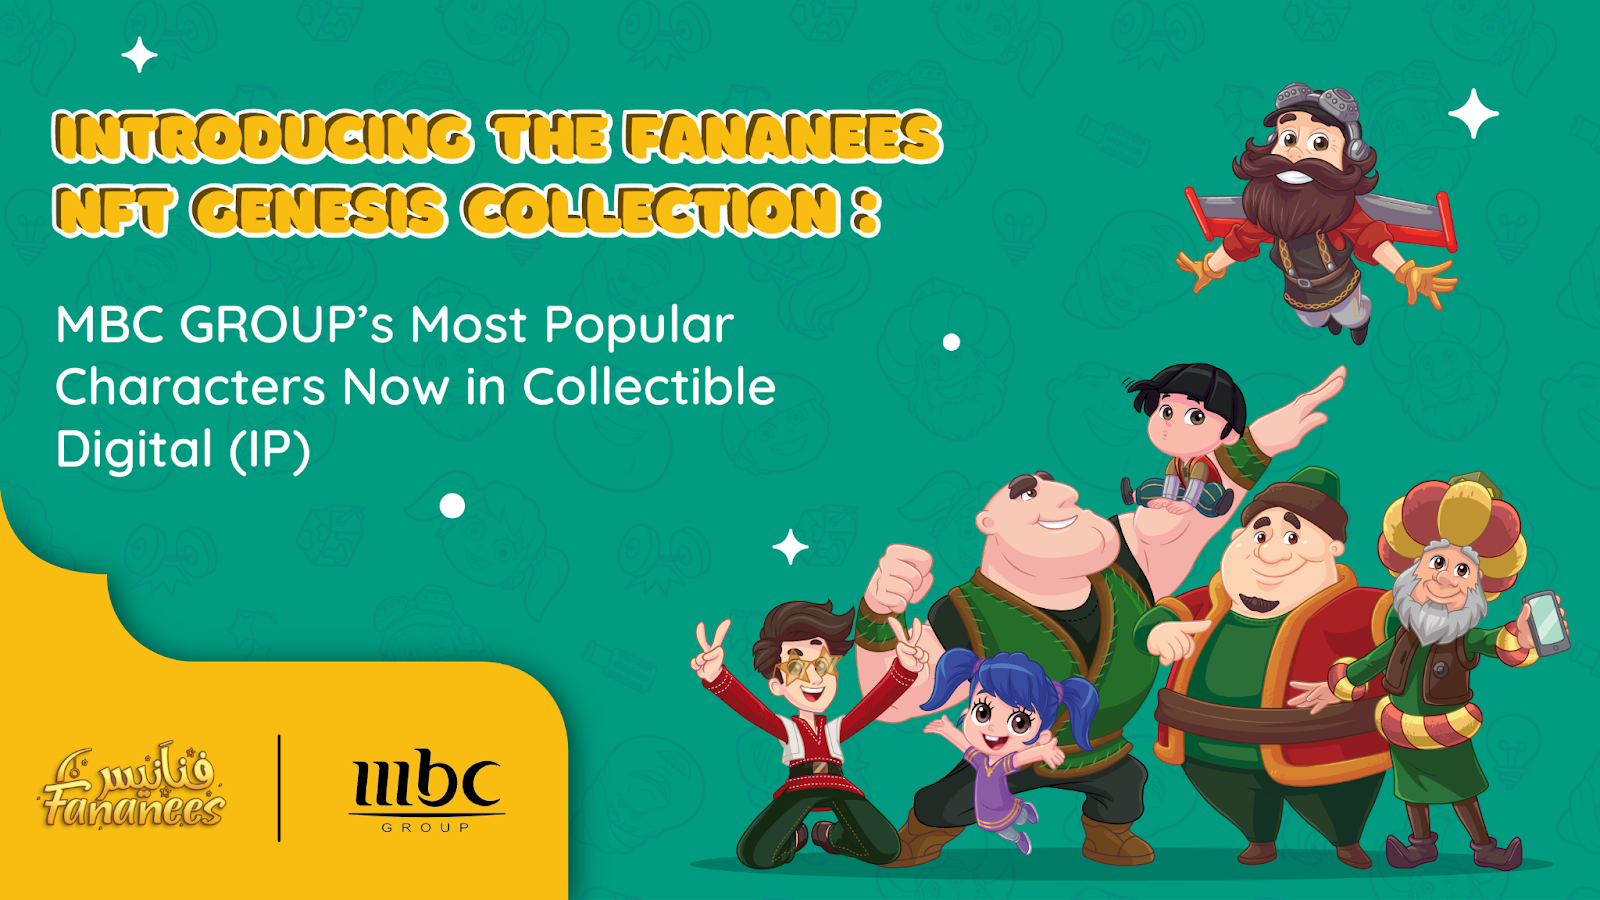 MBC GROUP's Most Popular Characters are now Available via the Fananees NFT Genesis Collection - 1